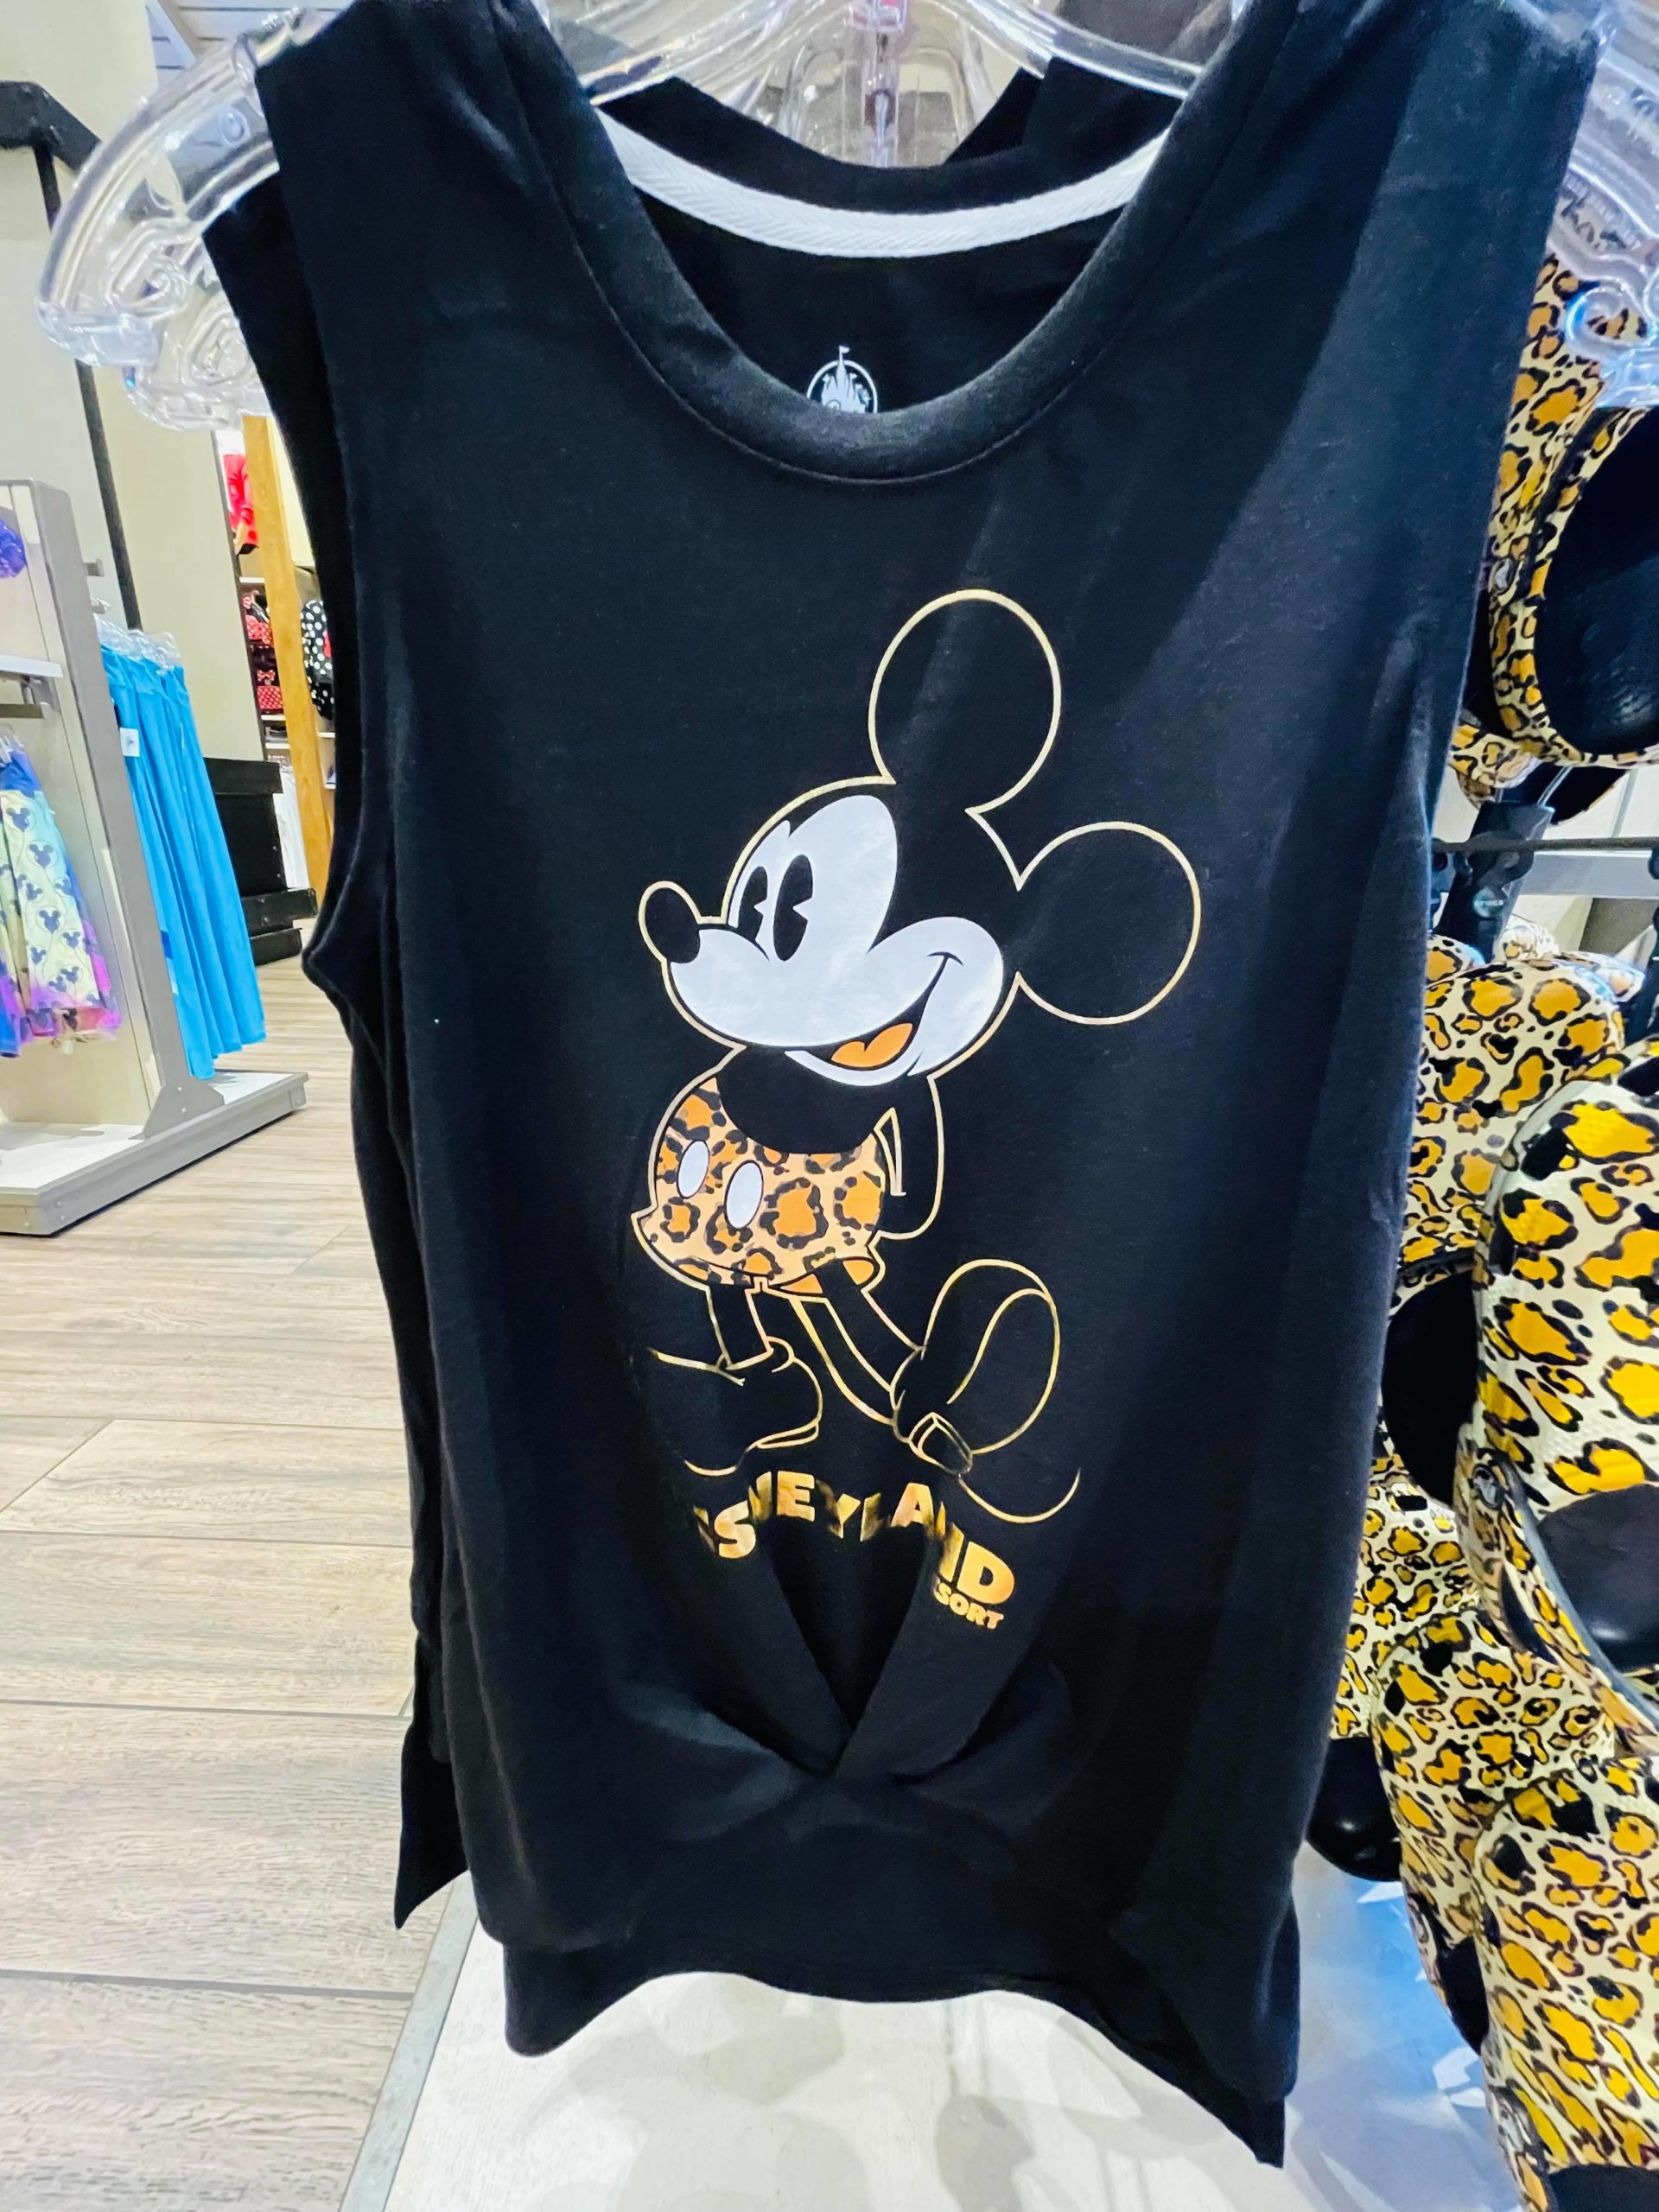 Matching Leopard-Print Crocs and Tank Top Found at World of Disney in ...